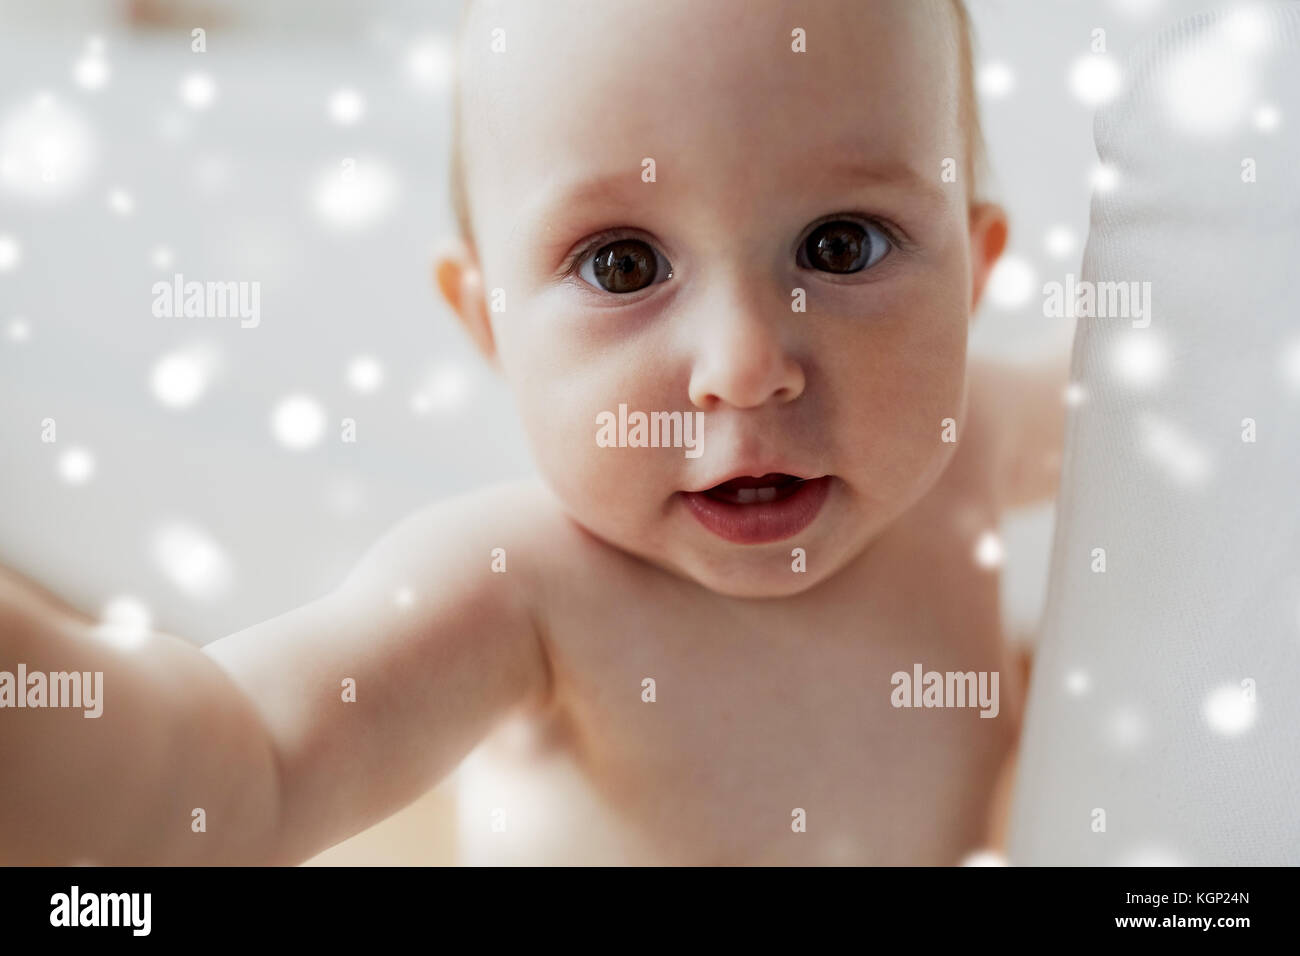 close up of happy little baby over snow Stock Photo